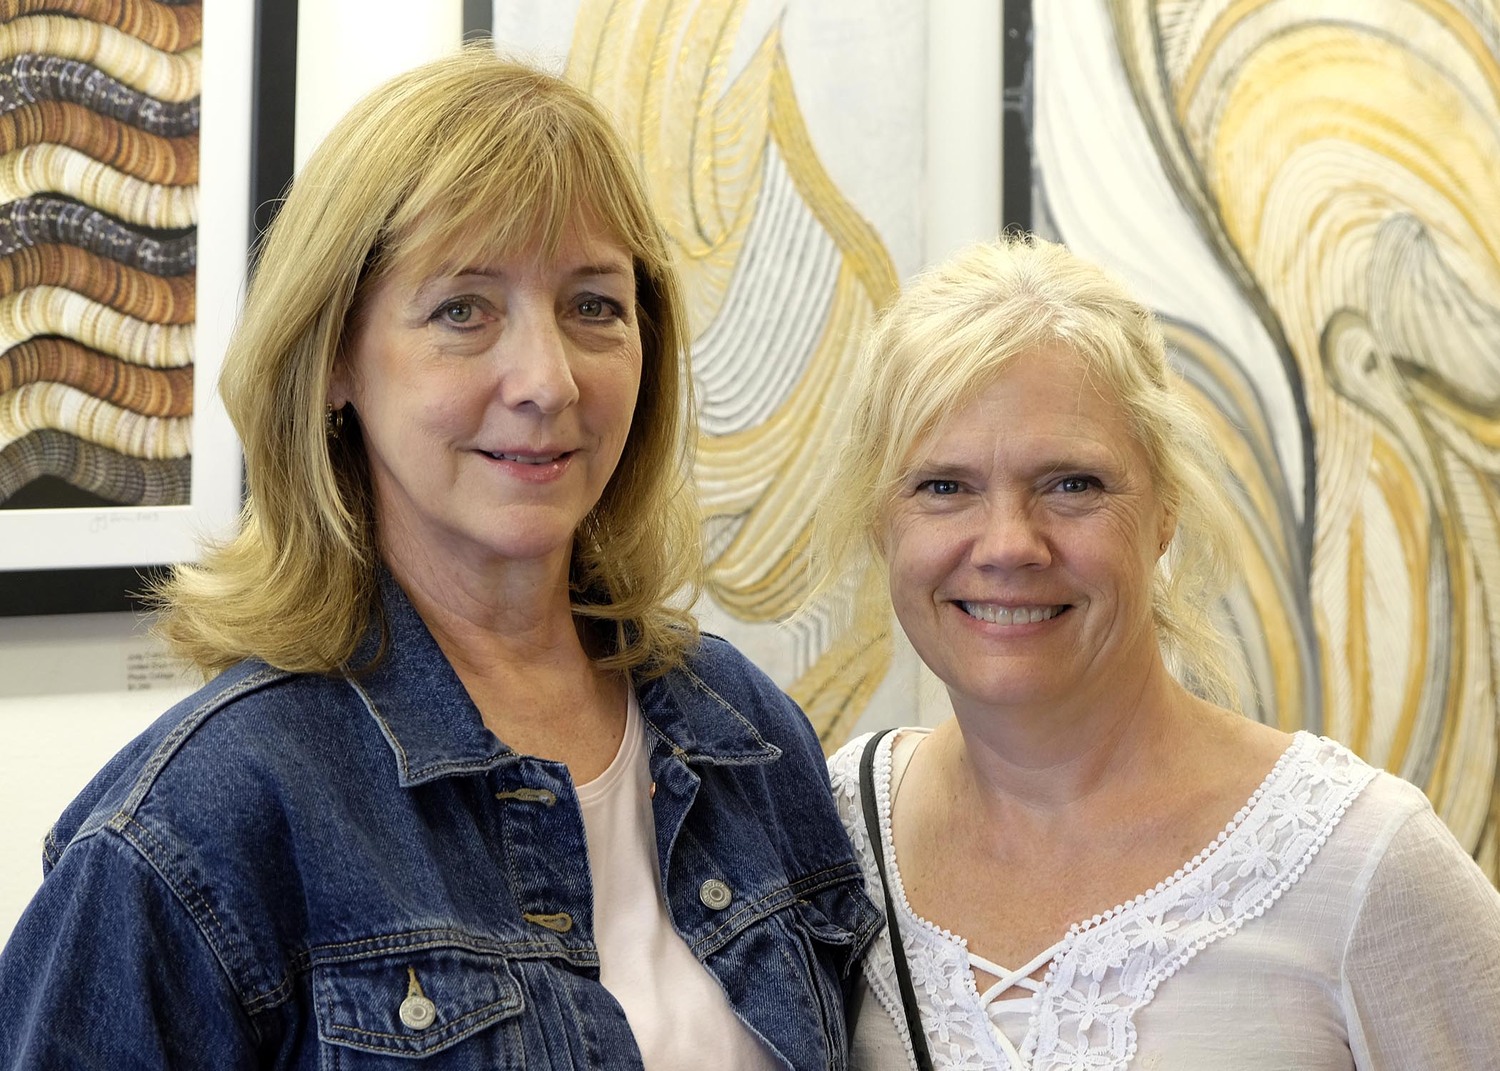 The Southampton Artists Association hosted a reception for its Labor Day Exhibit at the Southampton Cultural Center on Saturday. Among those attending were board members Pamela Morrison and Danielle Leef. COURTESY SOUTHAMPTON ARTISTS ASSOCIATION